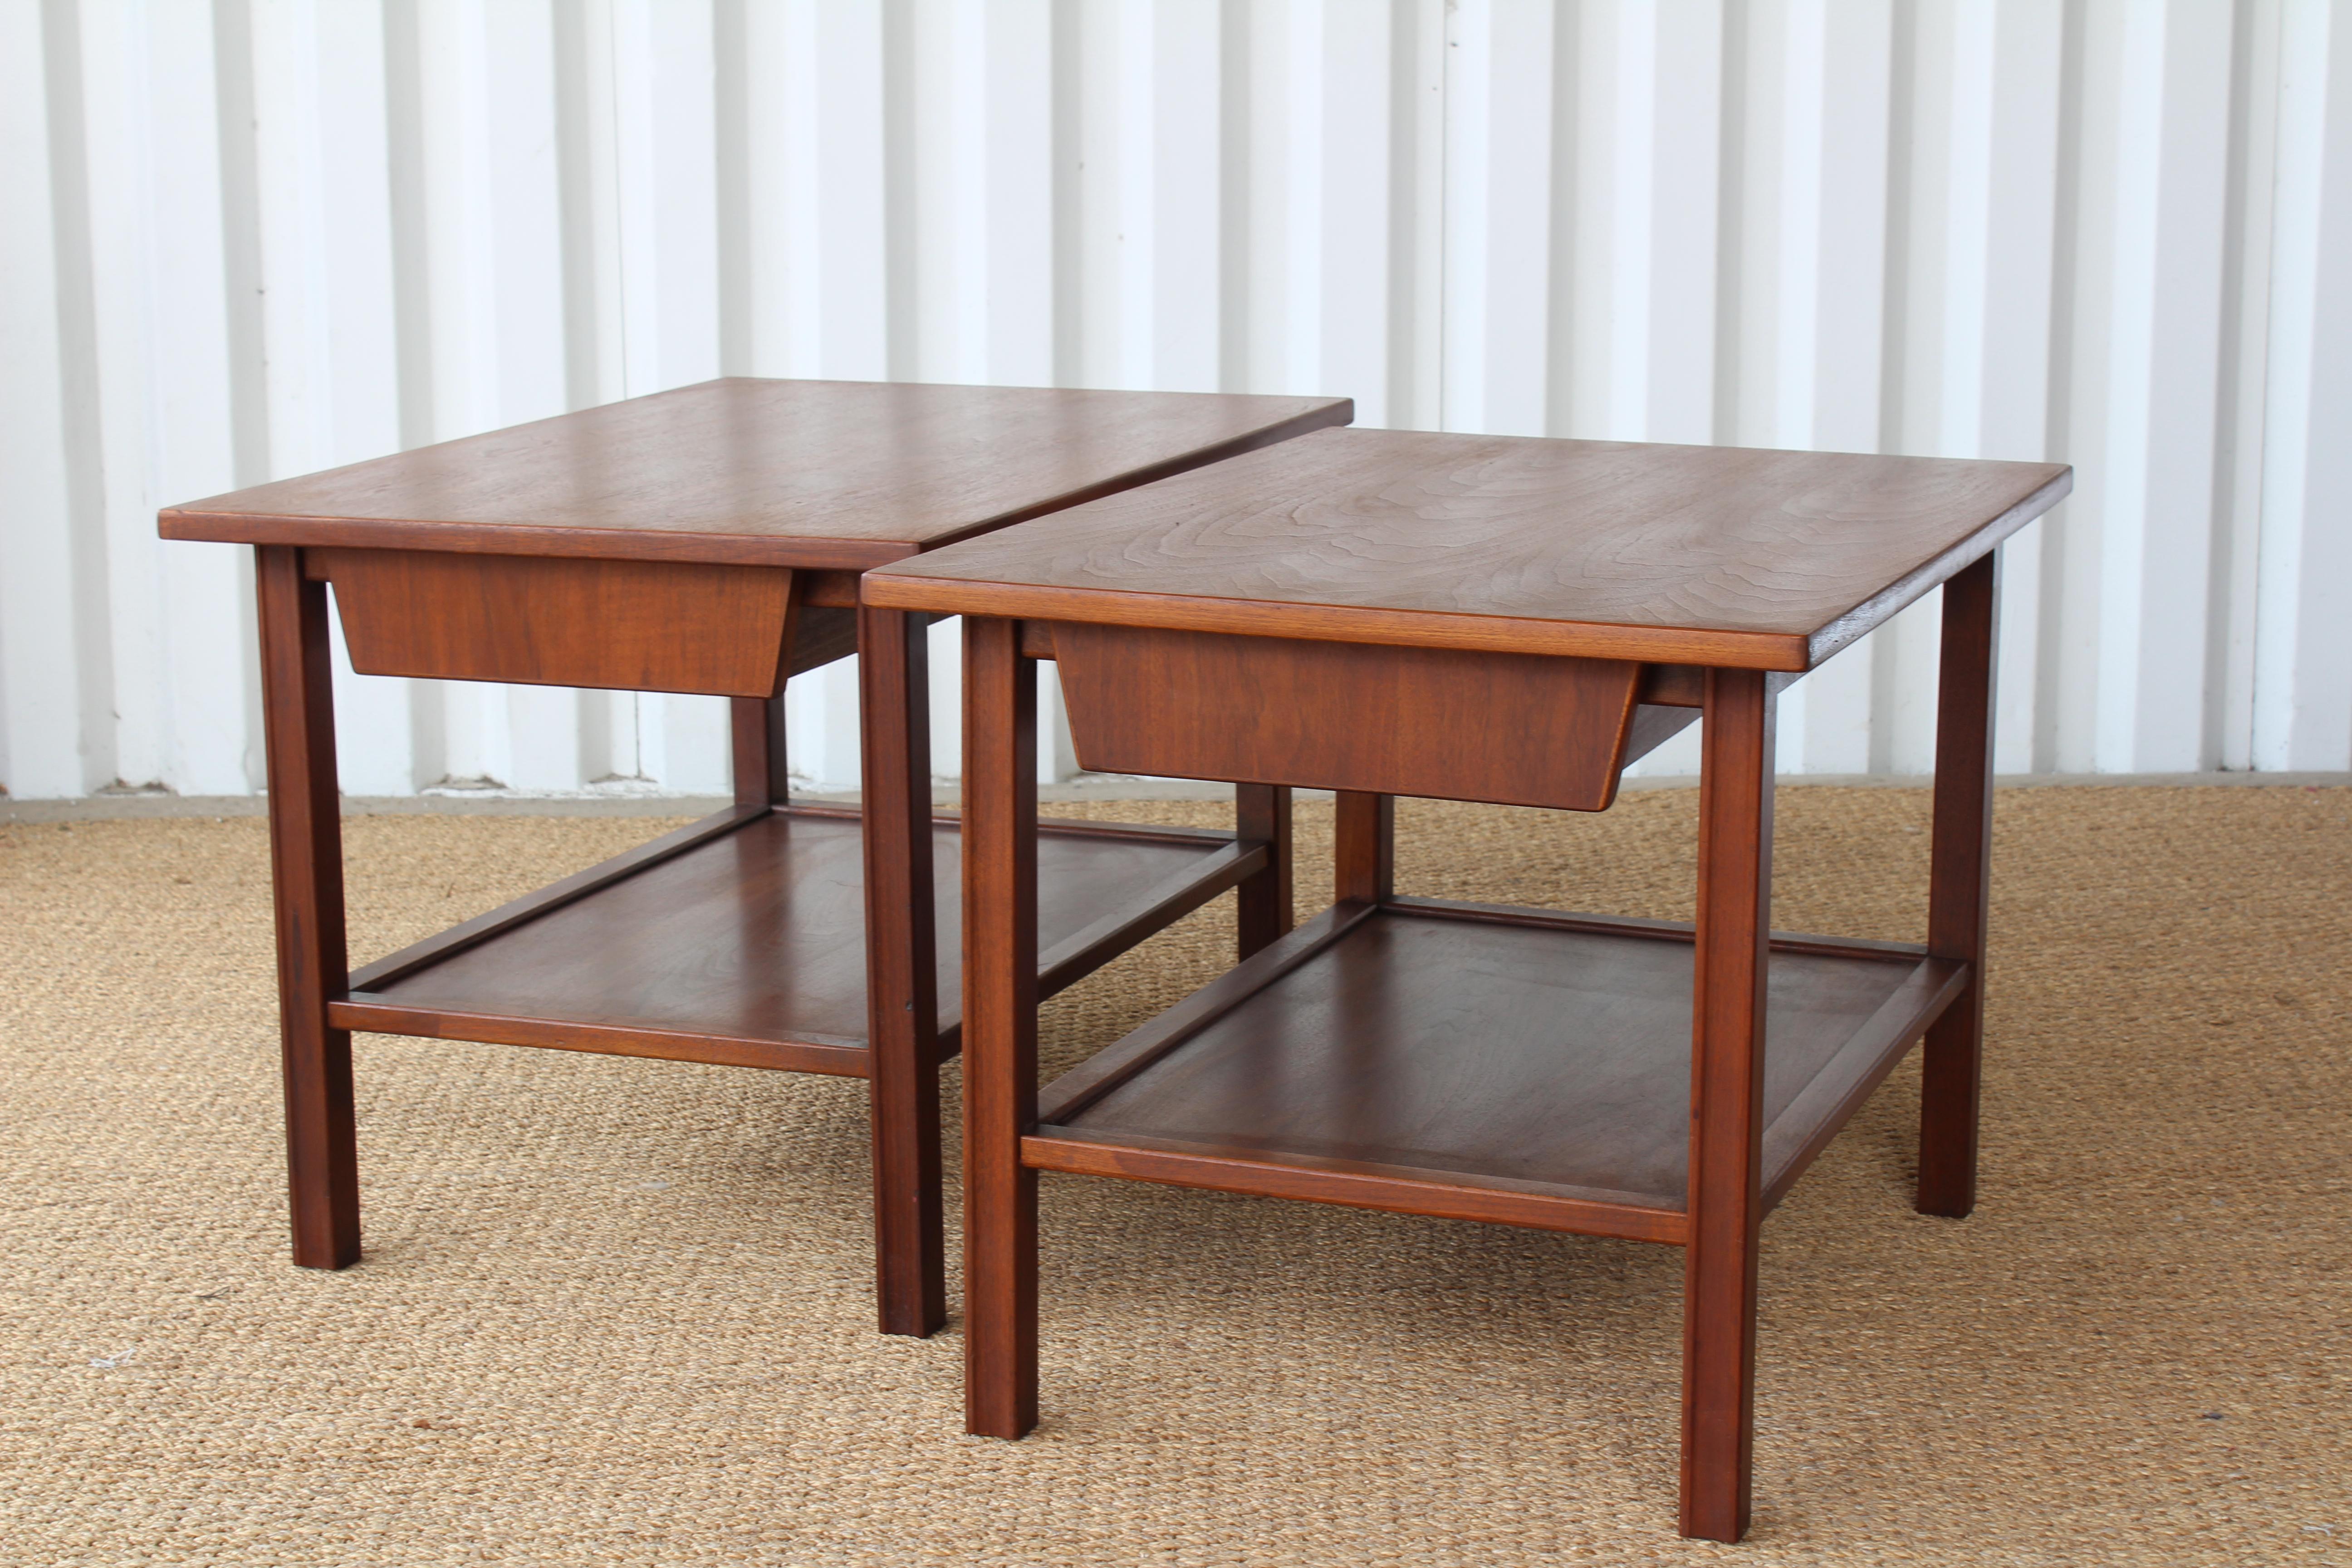 Pair of Mid-Century Modern 1960s walnut end tables. Each end table is in great condition and features a single drawer and bottom shelf. Sold as a pair.